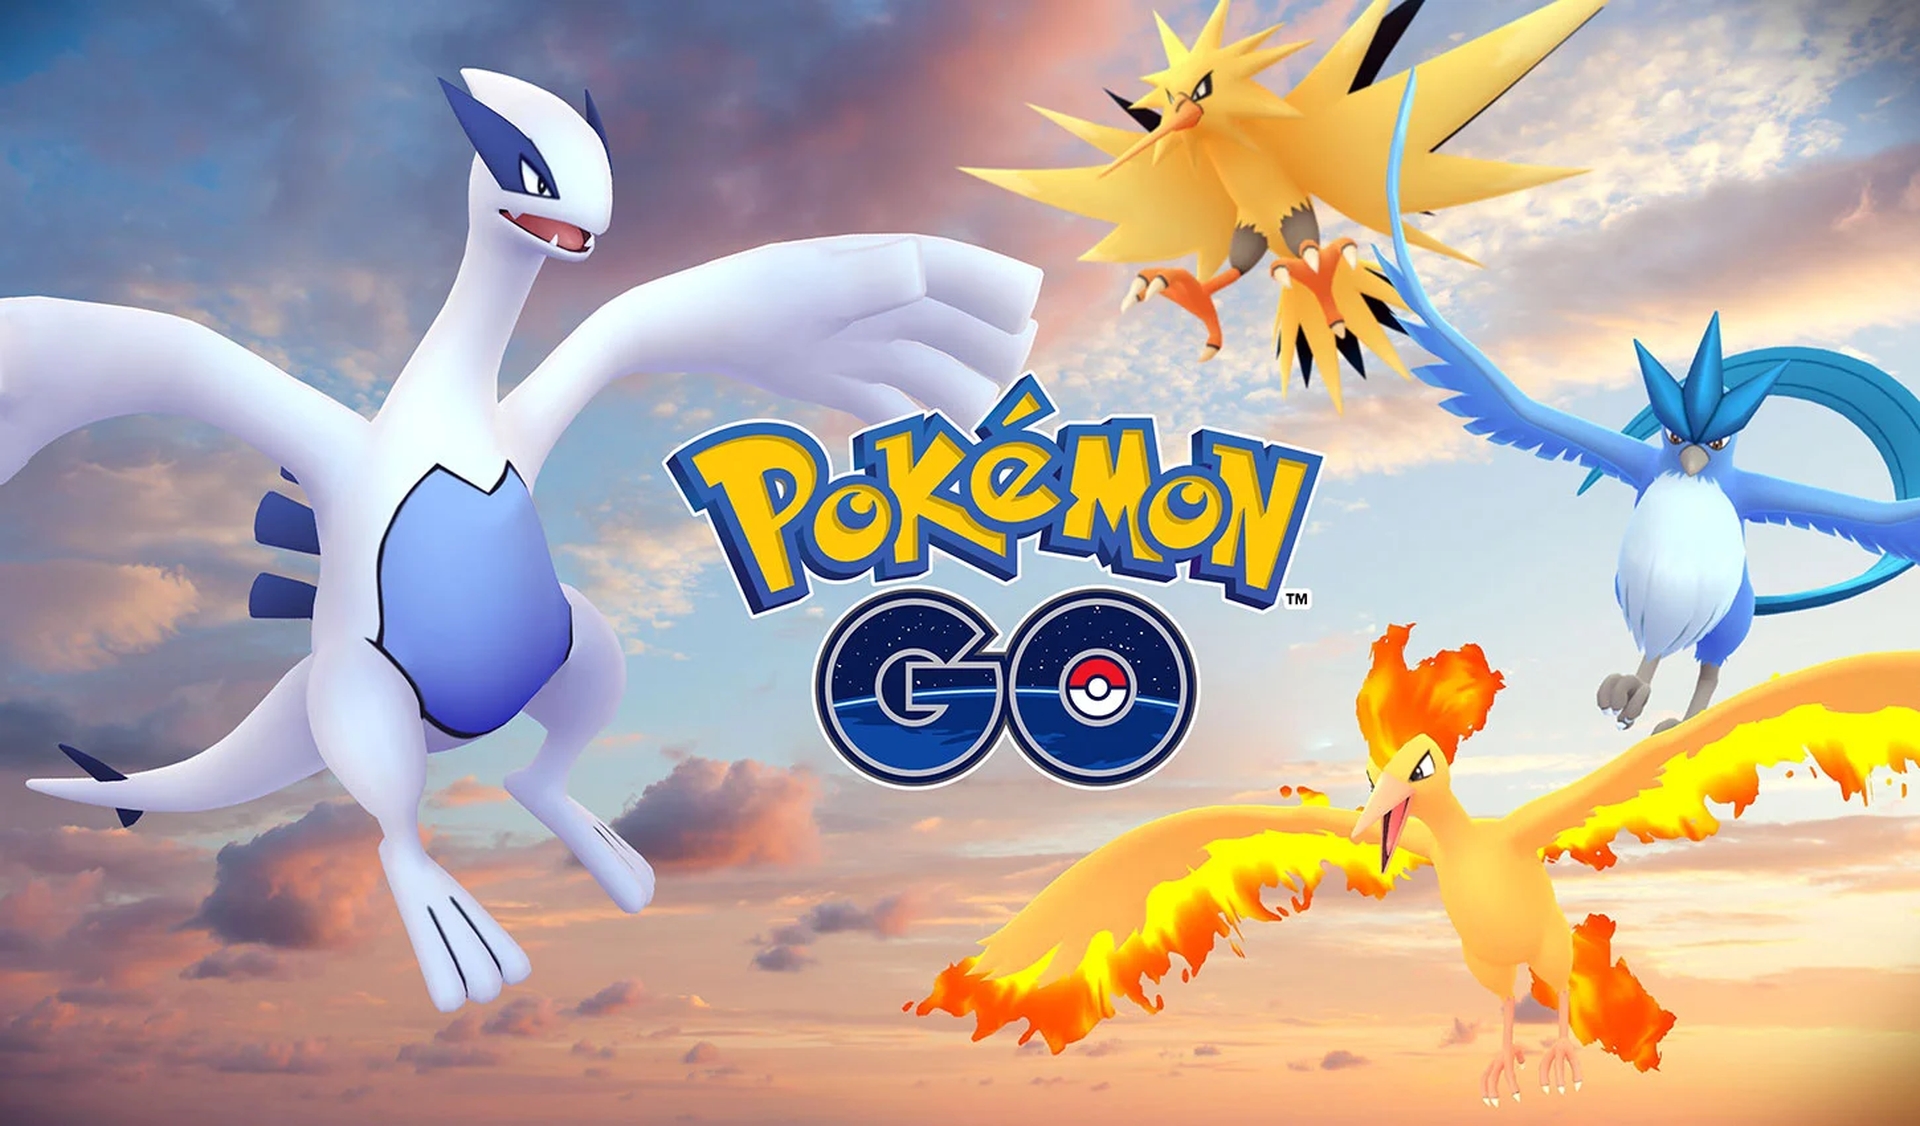 In this article, we are going to share with you our best Pokemon GO hacks 2022, so you can get the most out of the game with fewer hurdles.